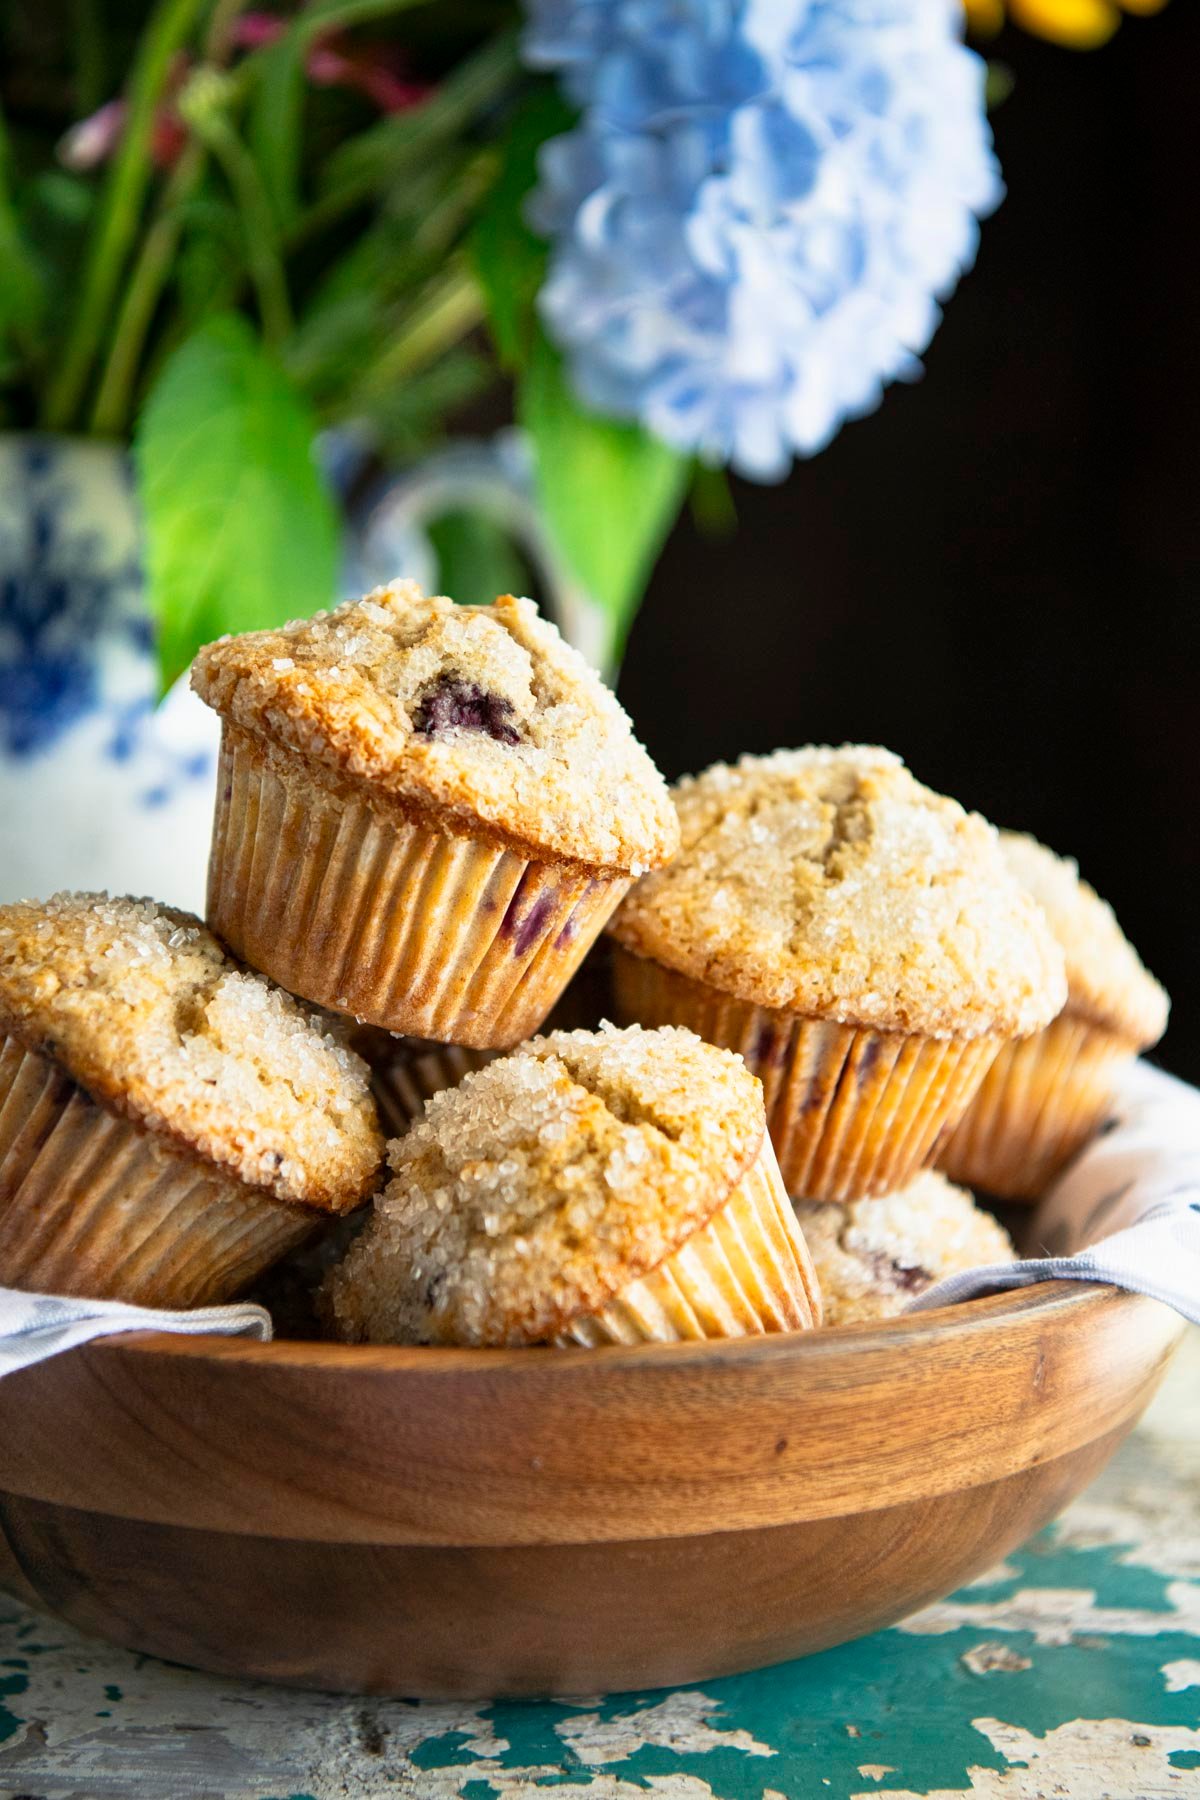 Side shot of blackberry muffins in a wooden bowl with hydrangeas in the background.